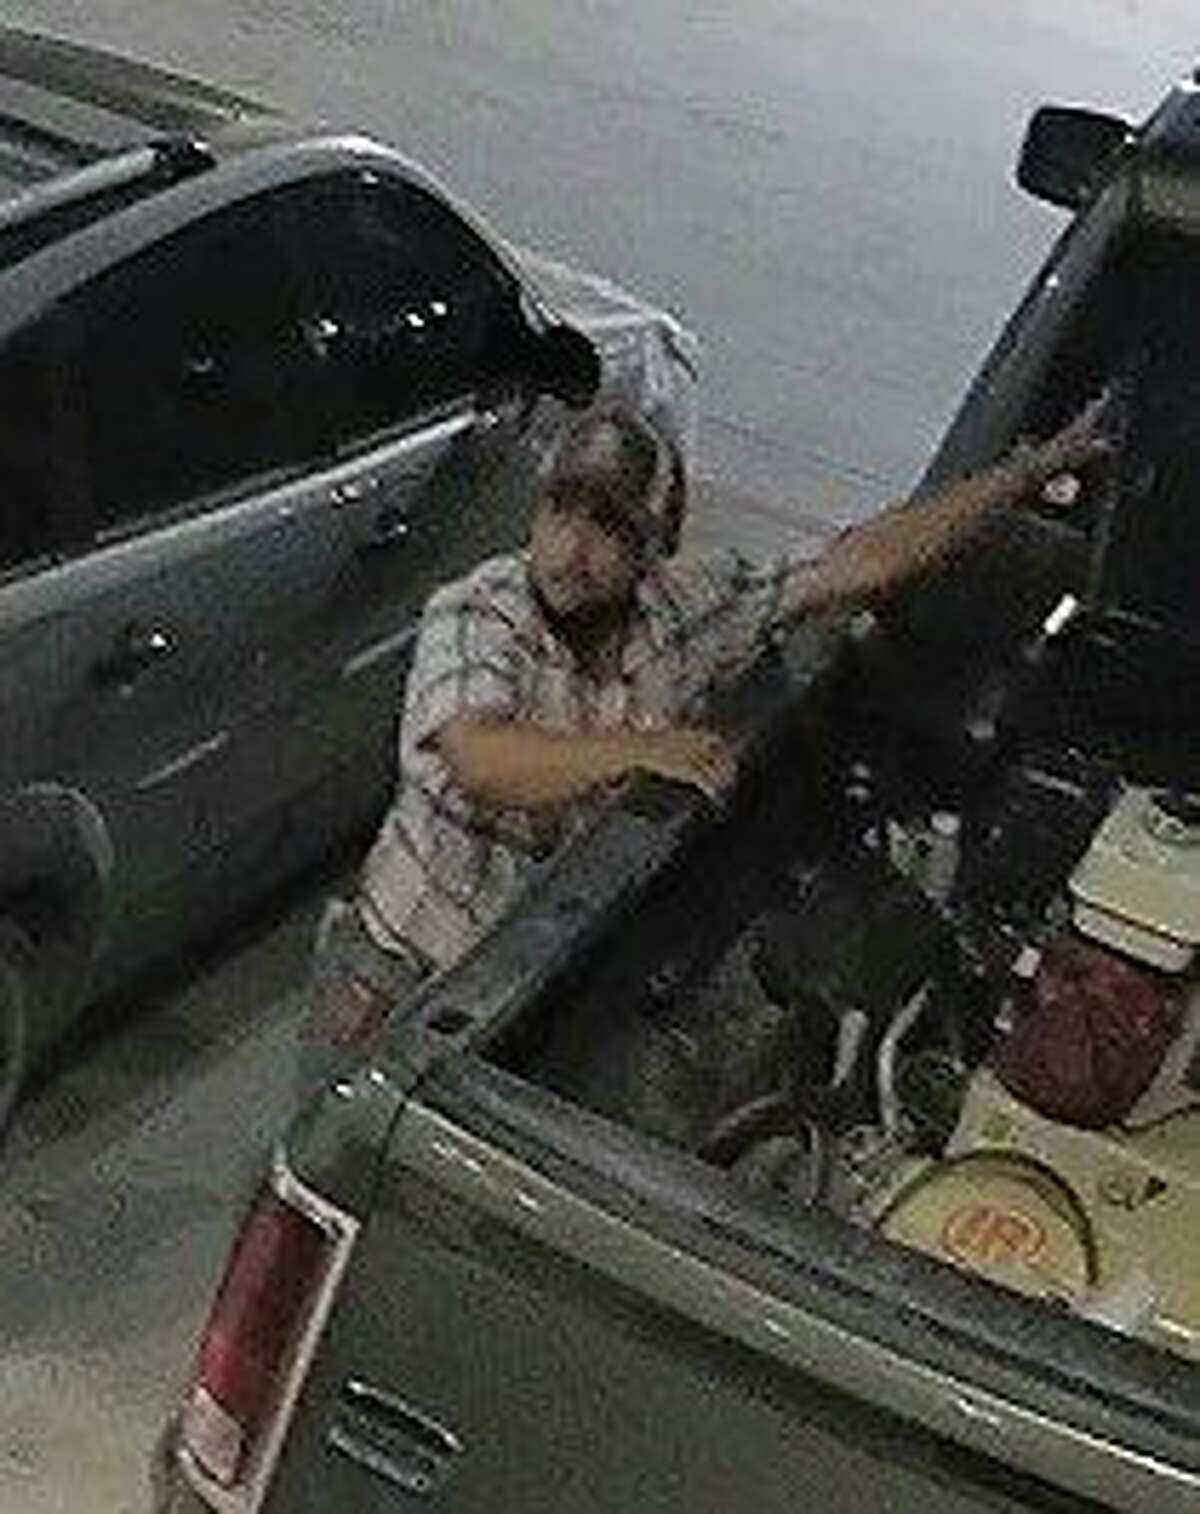 The Midland Police Department and Midland Crime Stoppers are seeking information on a burglary suspect who stole over $2,000 worth of items from unlocked work trucks. 